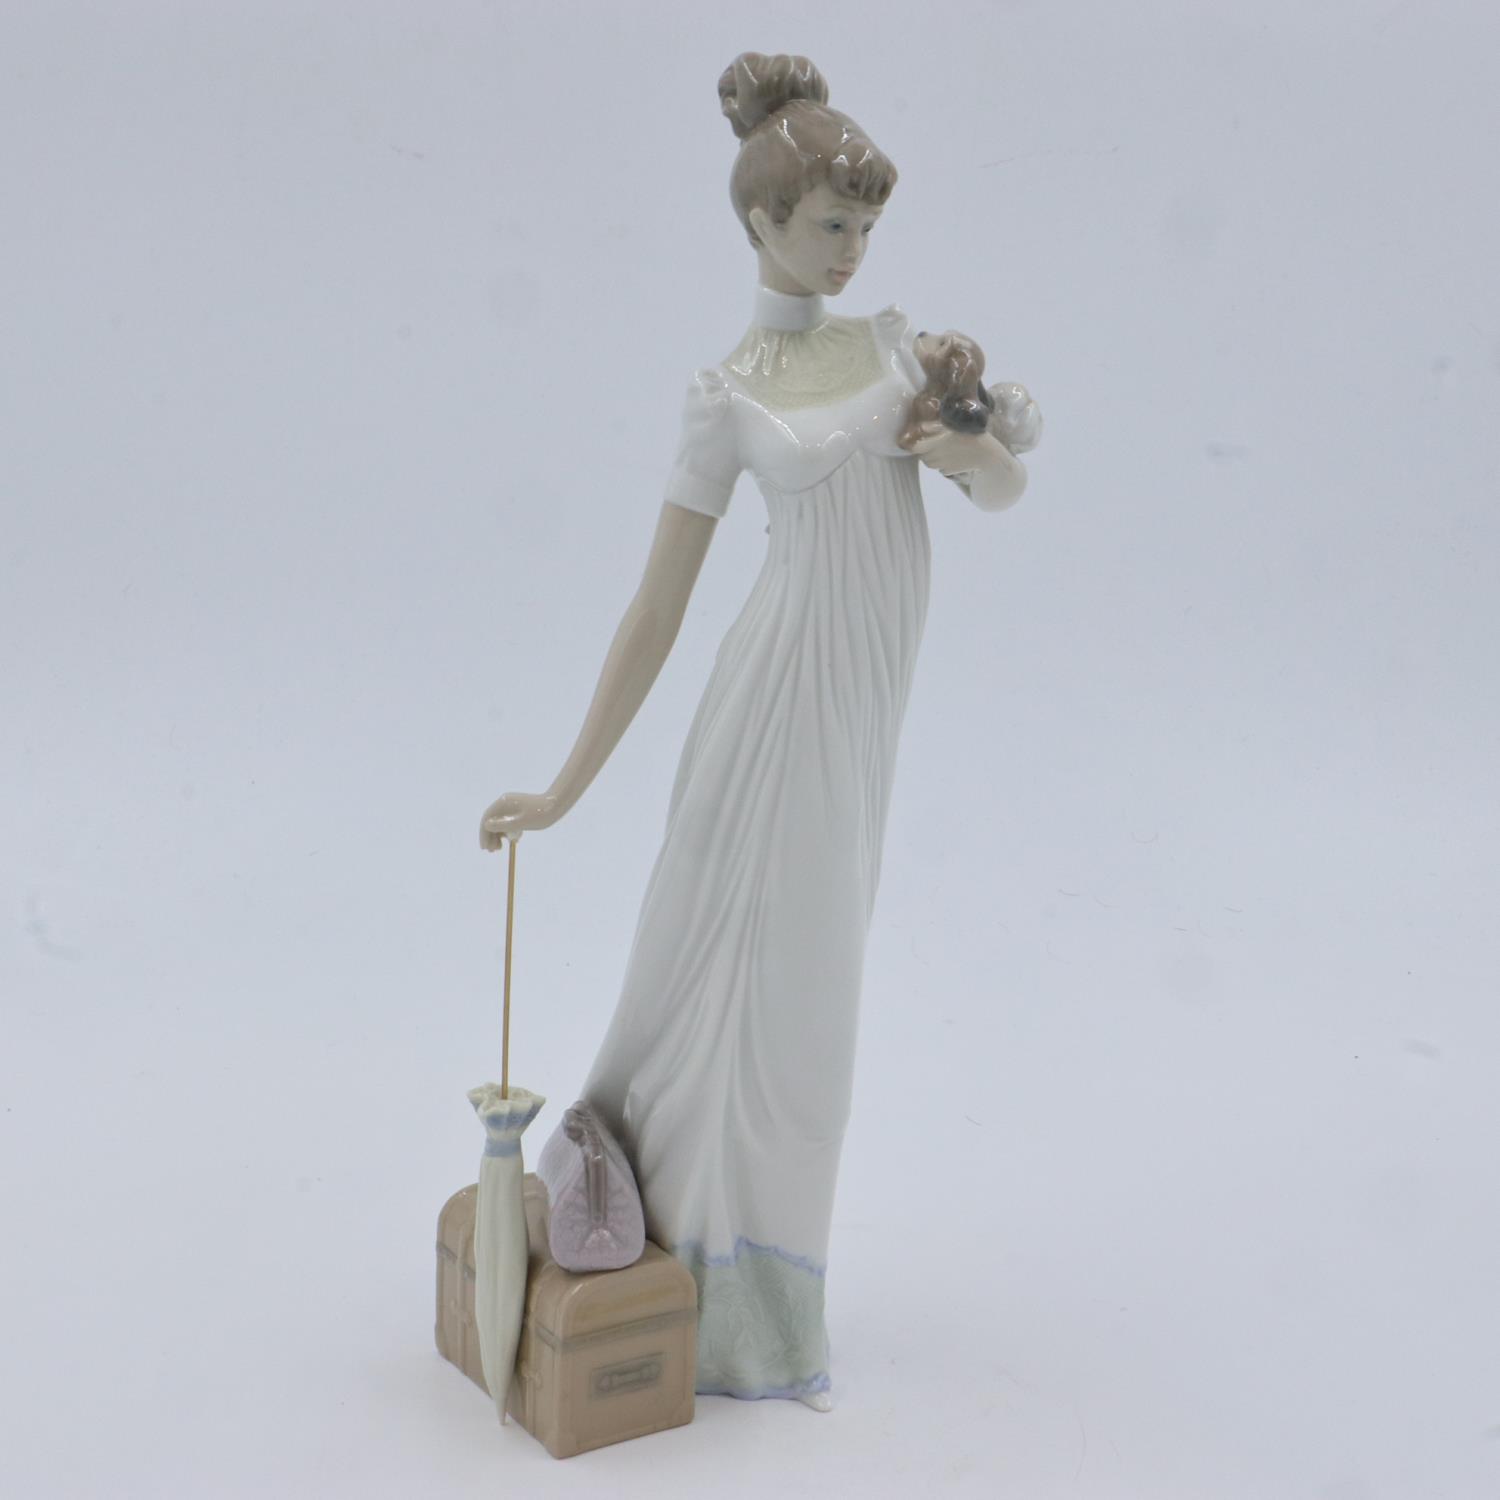 Lladro figurine of a girl with a suitcase, H: 35 cm, no chips or cracks. UK P&P Group 2 (£20+VAT for